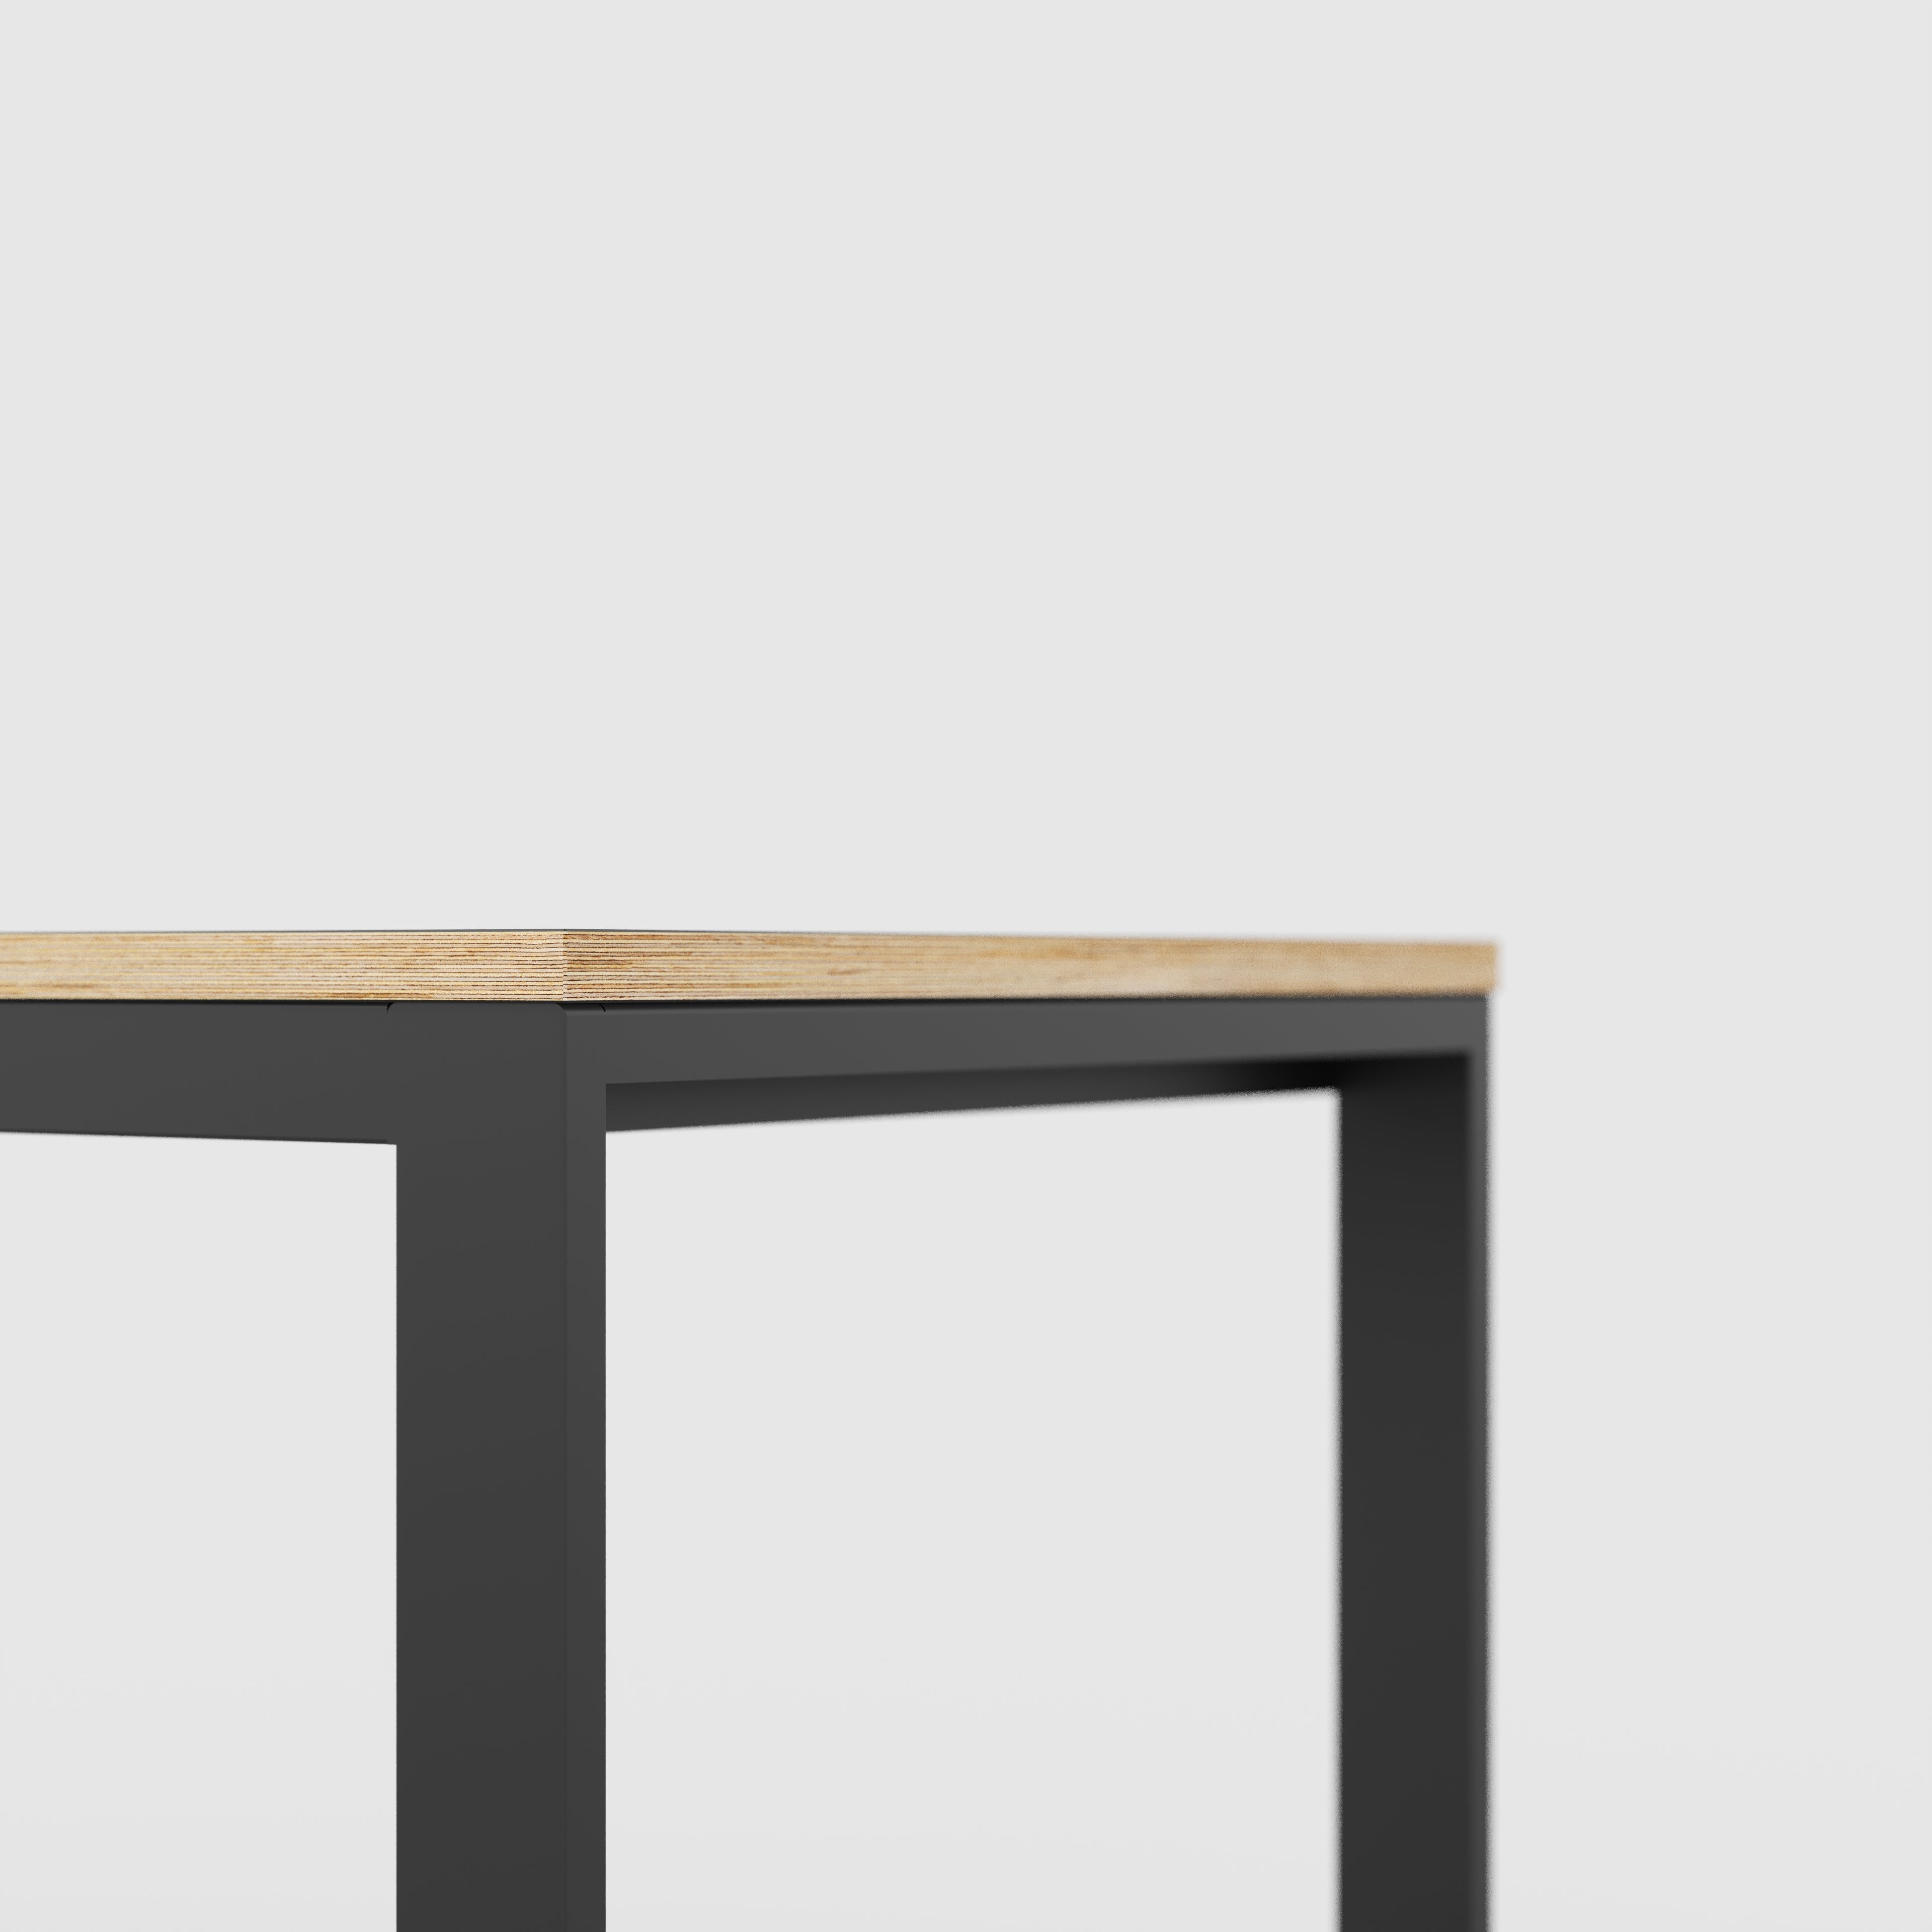 Table with Black Industrial Frame - Formica Diamond Black - 1800(w) x 745(d) x 735(h)